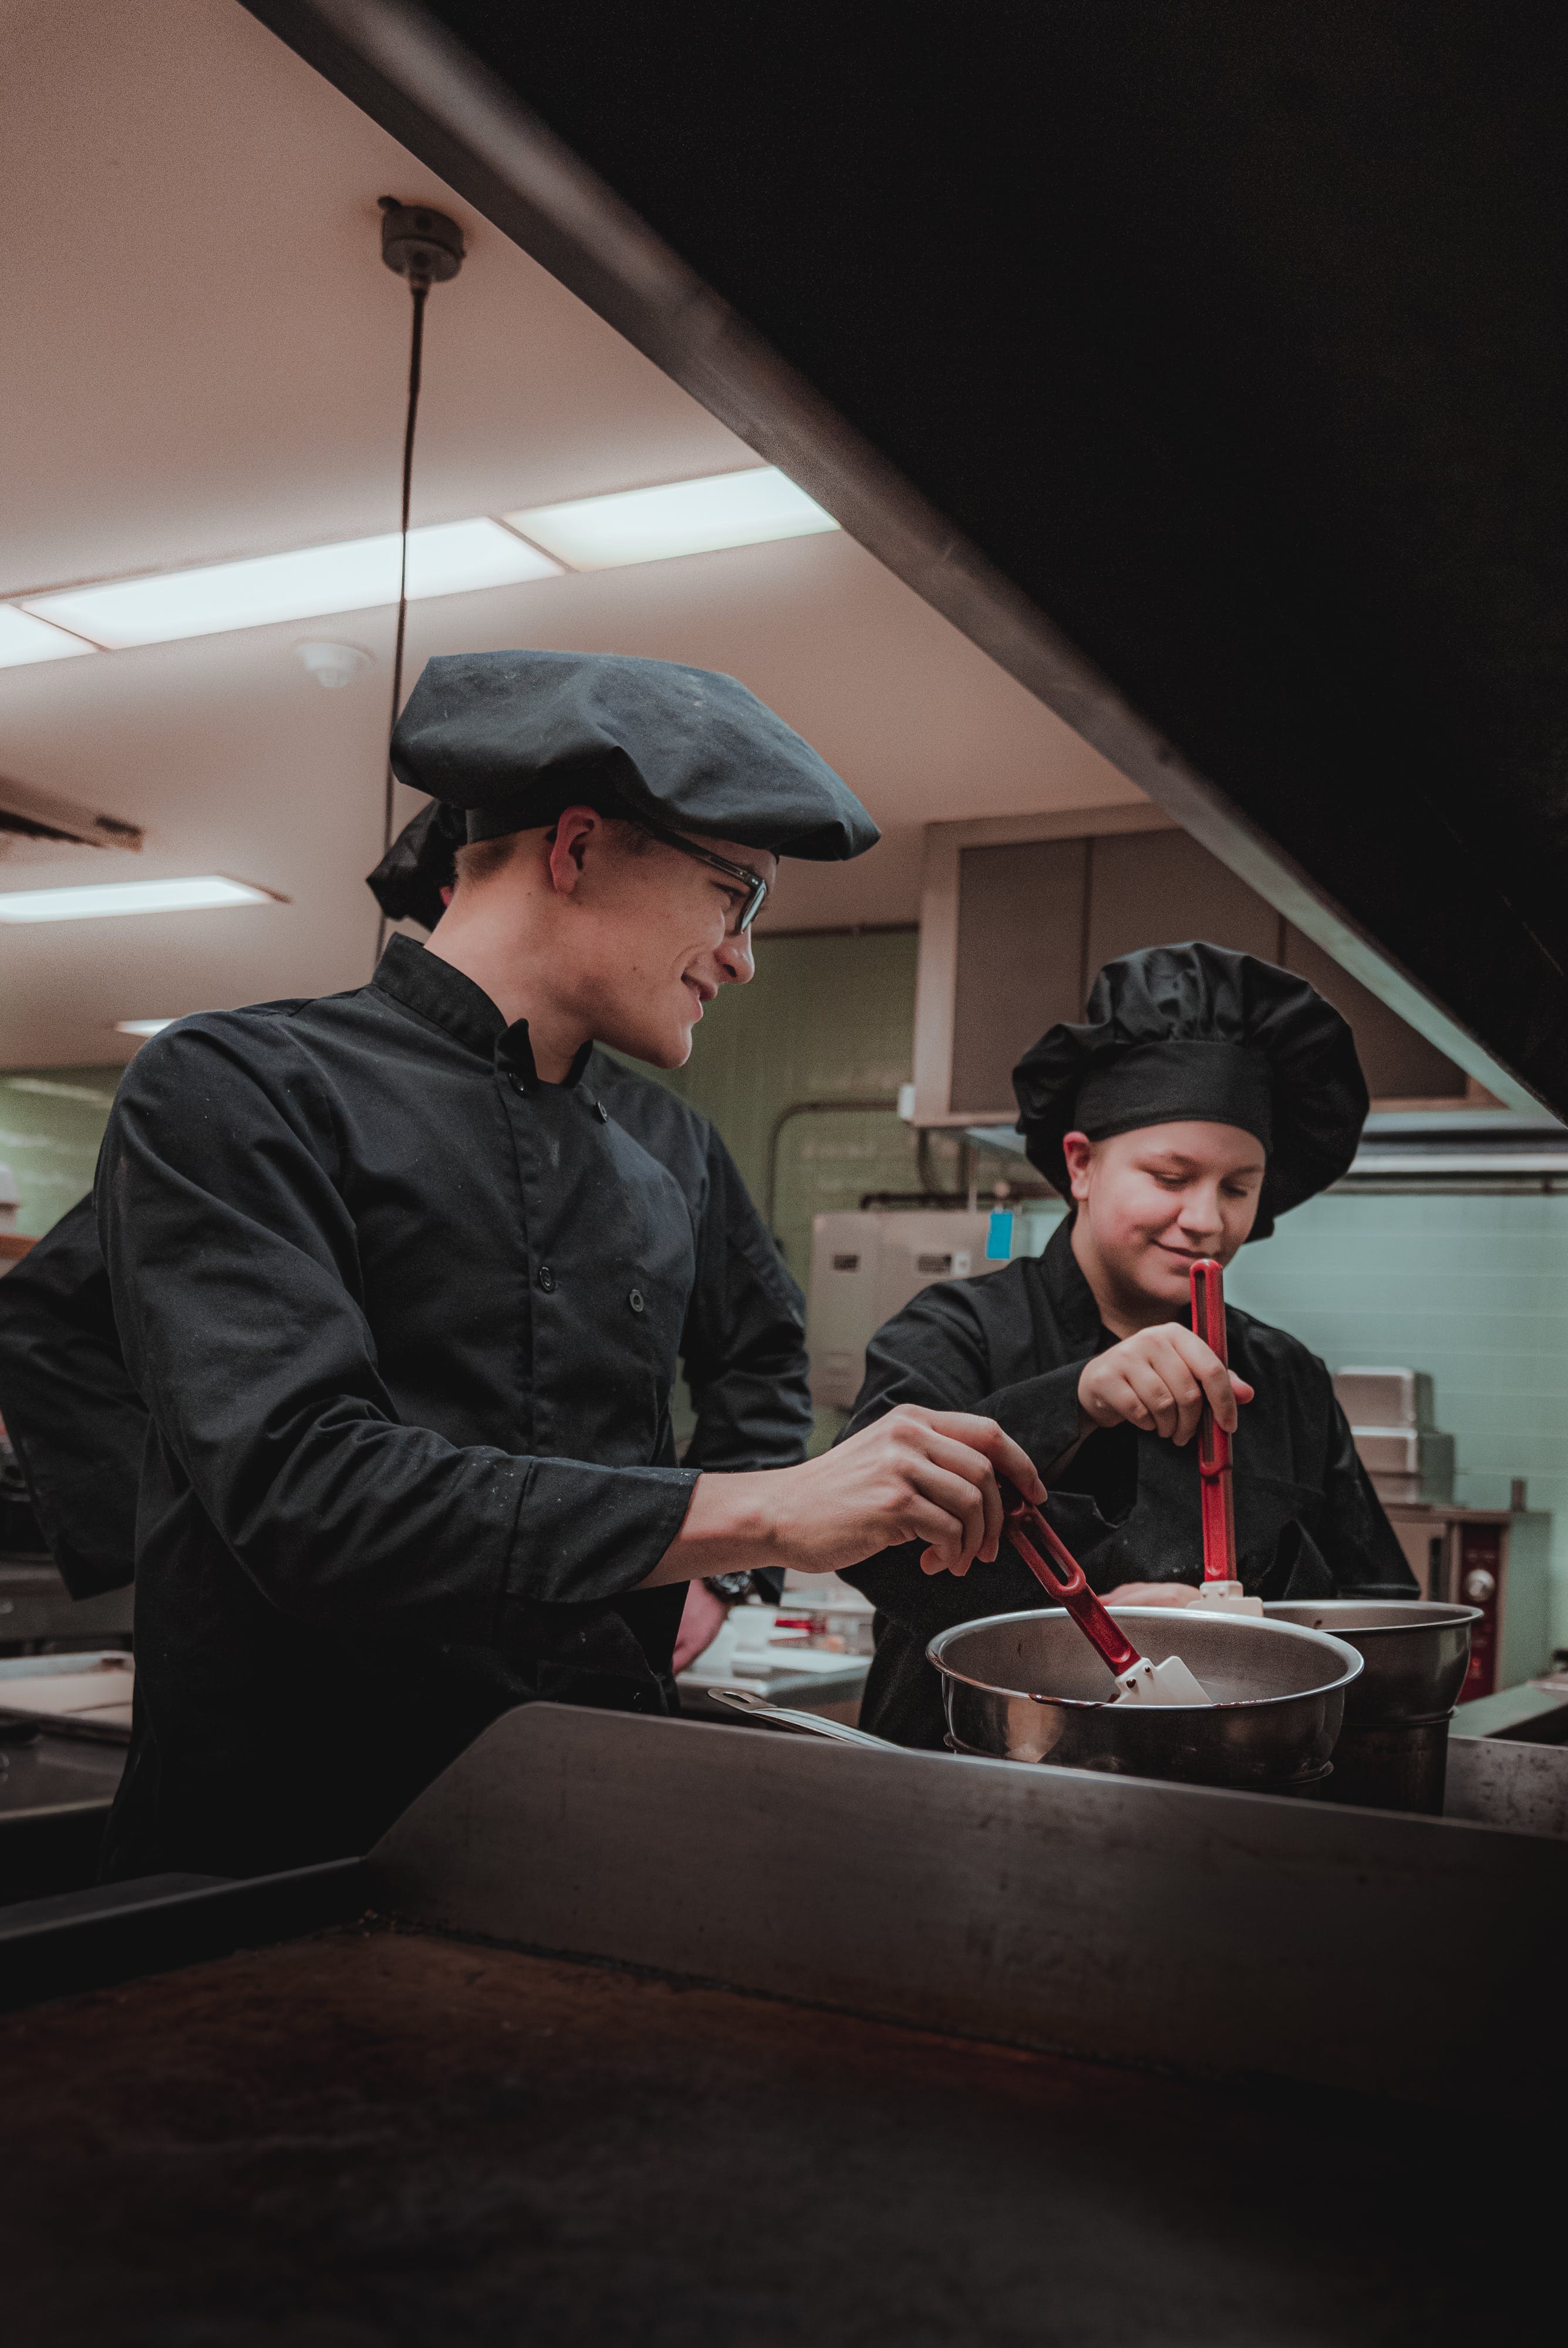 Two chefs cooking. | Source: Pexels